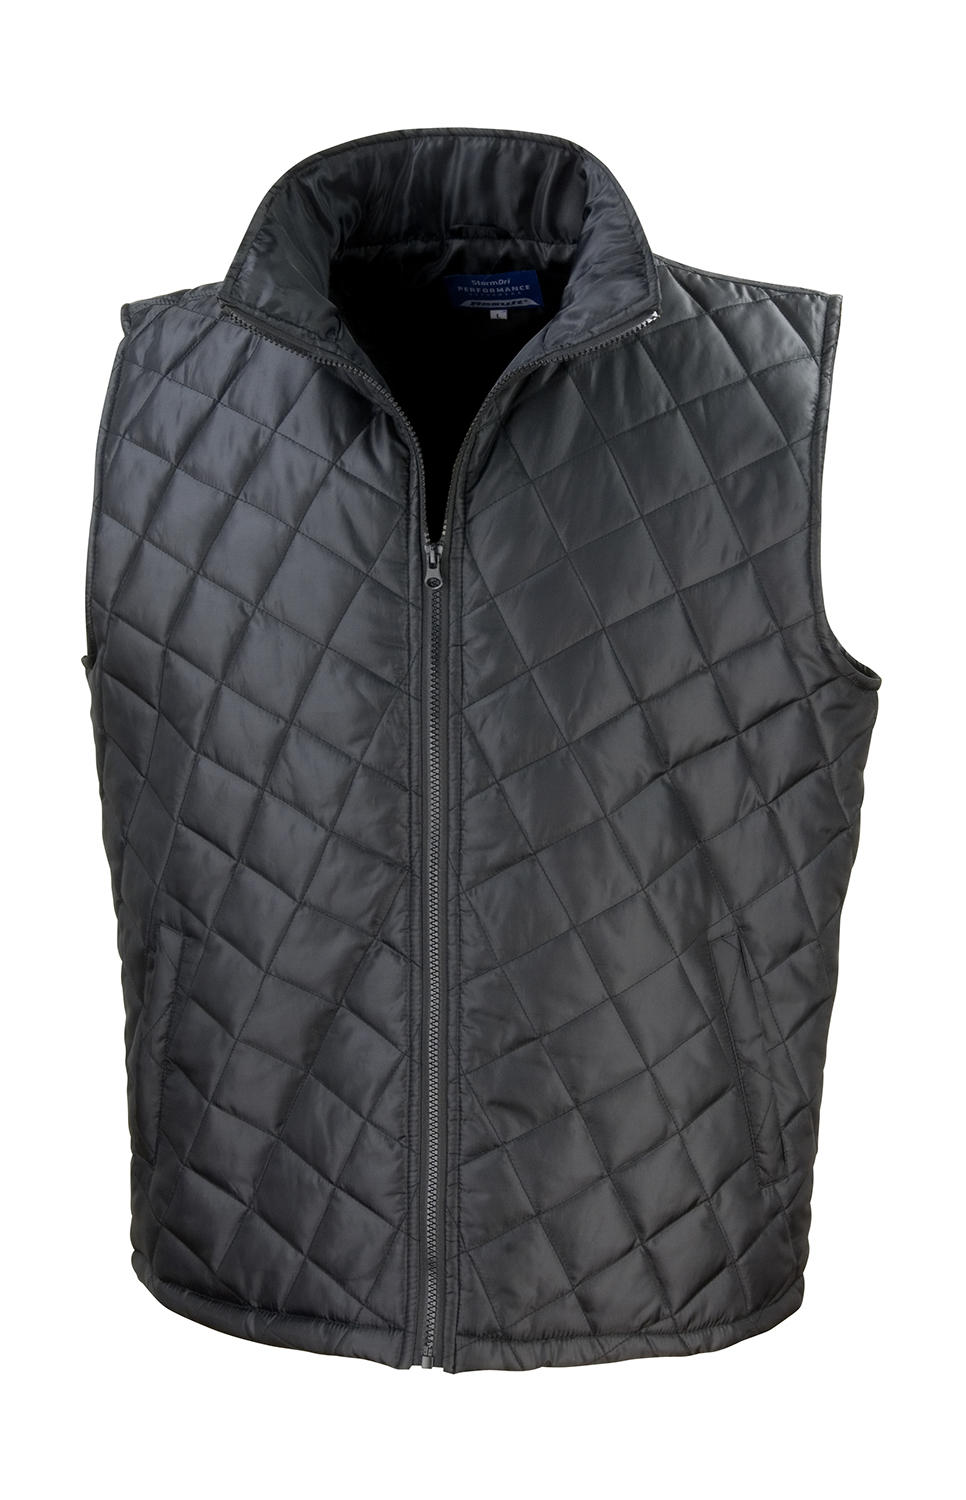  3-in-1 Jacket with quilted Bodywarmer in Farbe Black